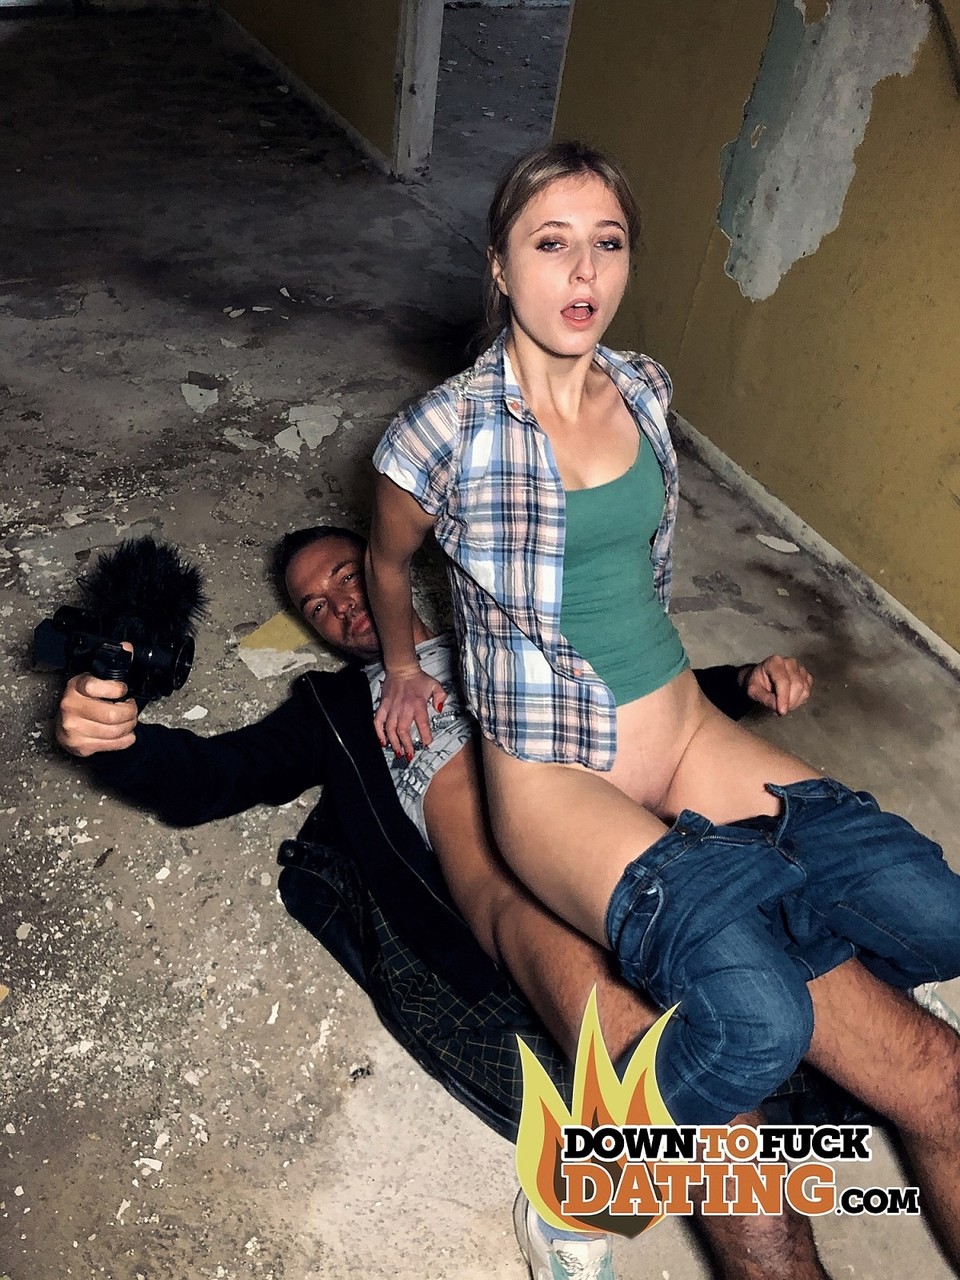 Amateur teen Minori blows a dick before climbing on it in an abandoned place foto porno #423935030 | Analized Pics, Andy Star, Minori, Amateur, porno móvil